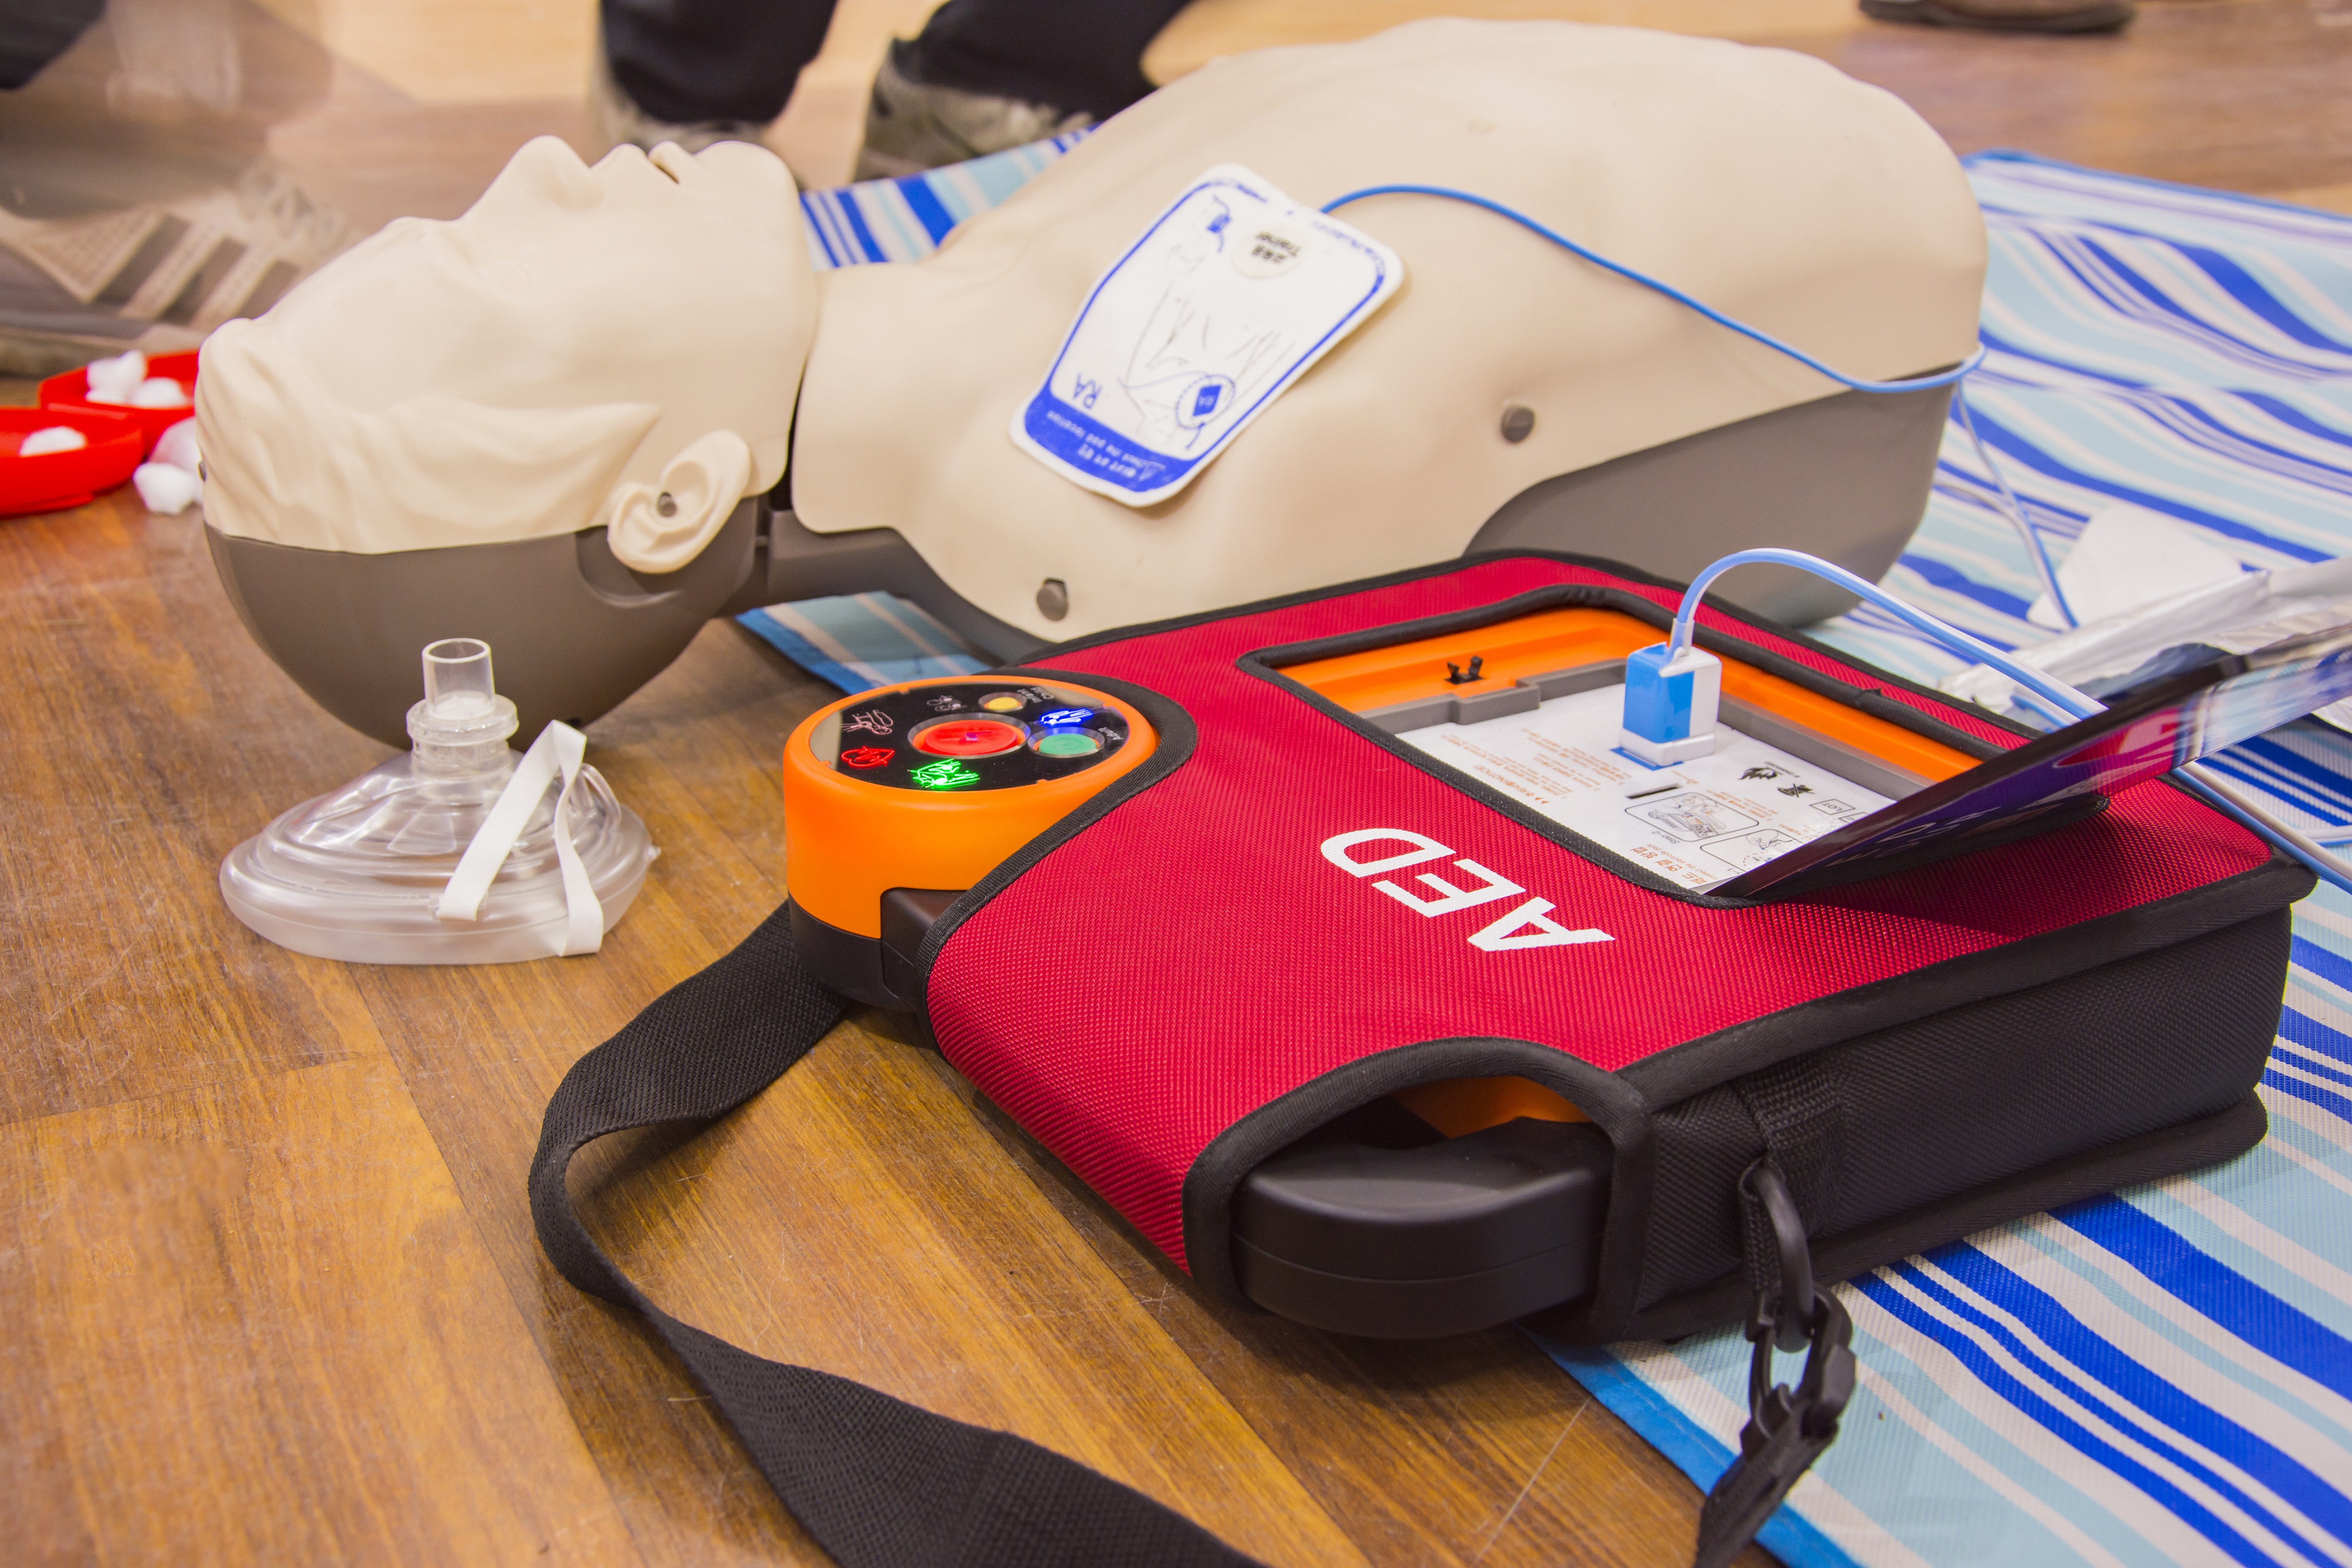 CPR AED First Aid Training Class June 4, 2022 in Salem